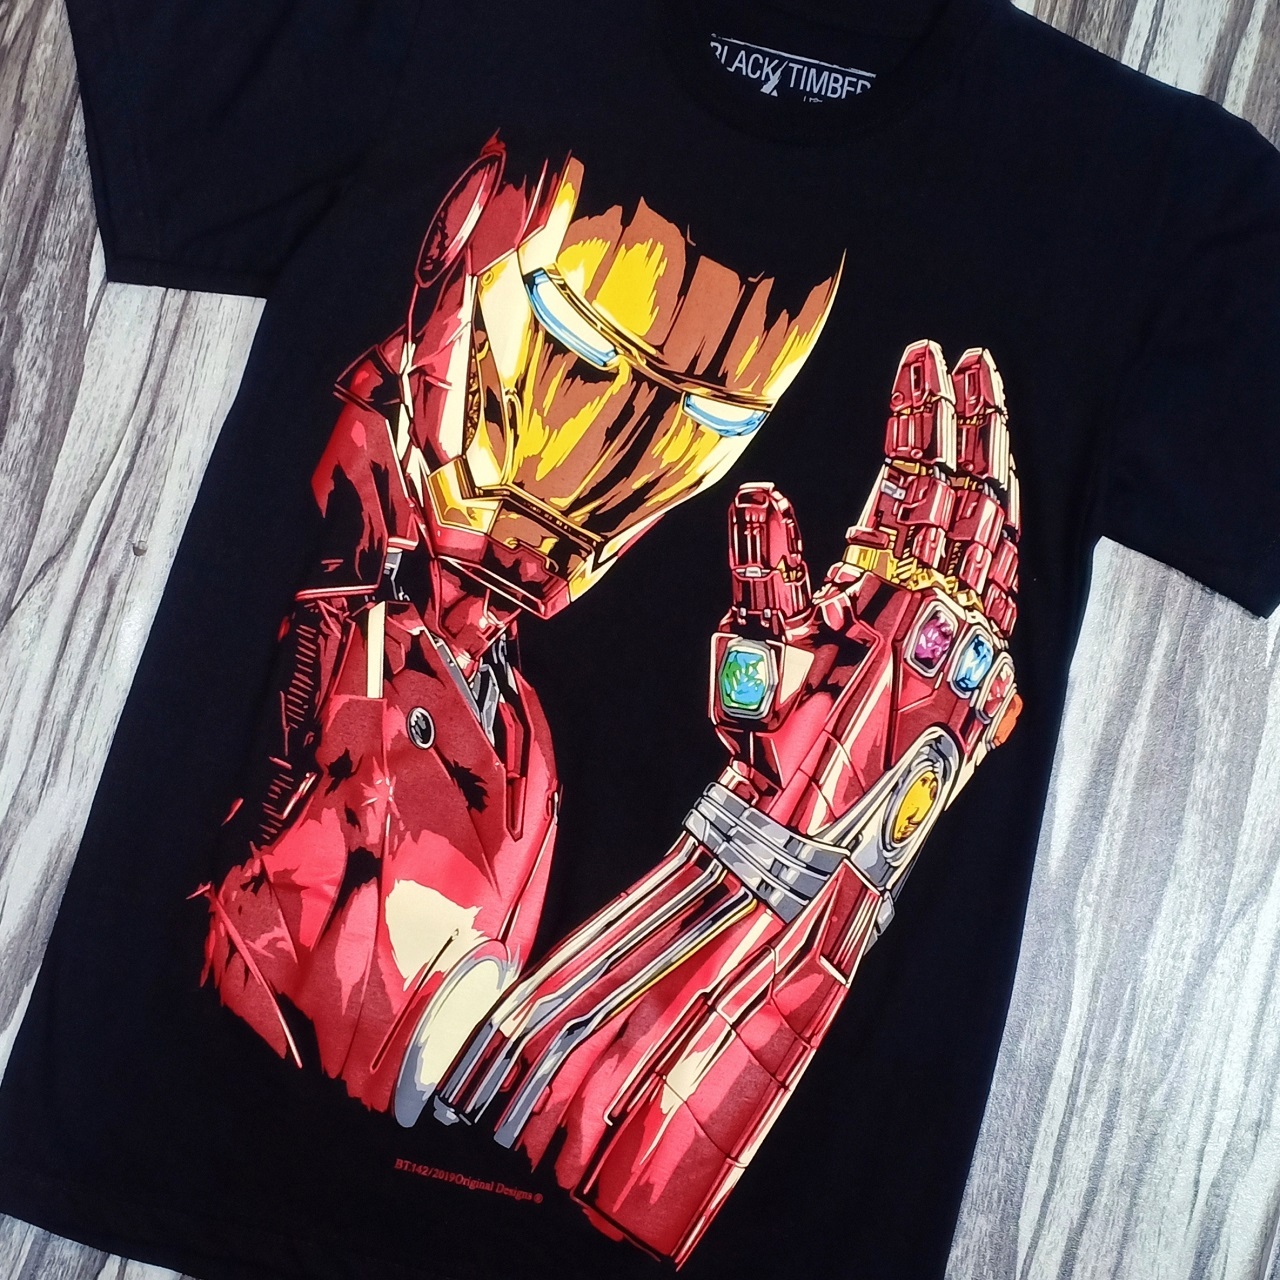 MARVEL IRON SILK PREMIUM GRADE T-SHIRT HIGH GAME SPEED BLACK SCREEN BT142 SYSTEM GAUNTLET SILK TIMBER NEW BLACK TIMBER MOAI QUALITY SCREEN HIGH END NANO QUALITY COLLECTABLE UNIVERSE COTTON TYPE MAN –